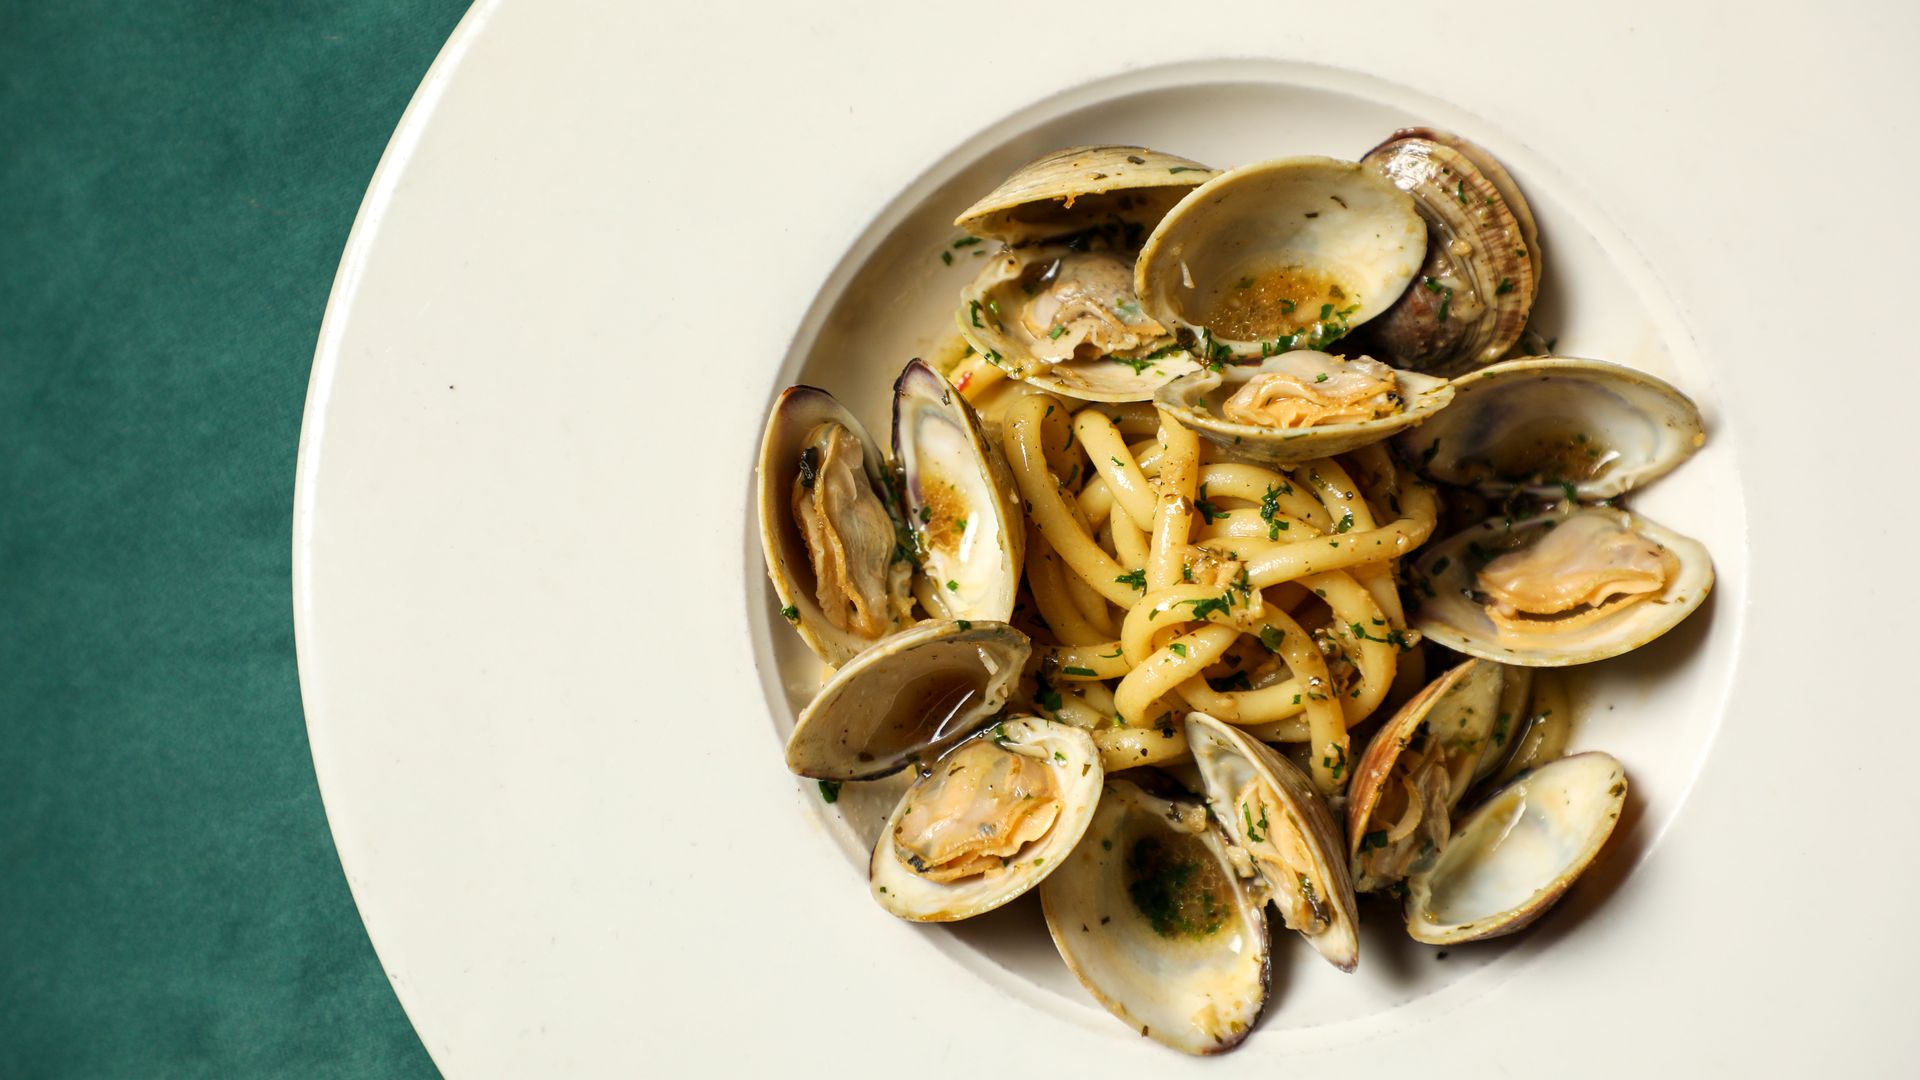 Photo shows cooked clams with linguini in a white bowl